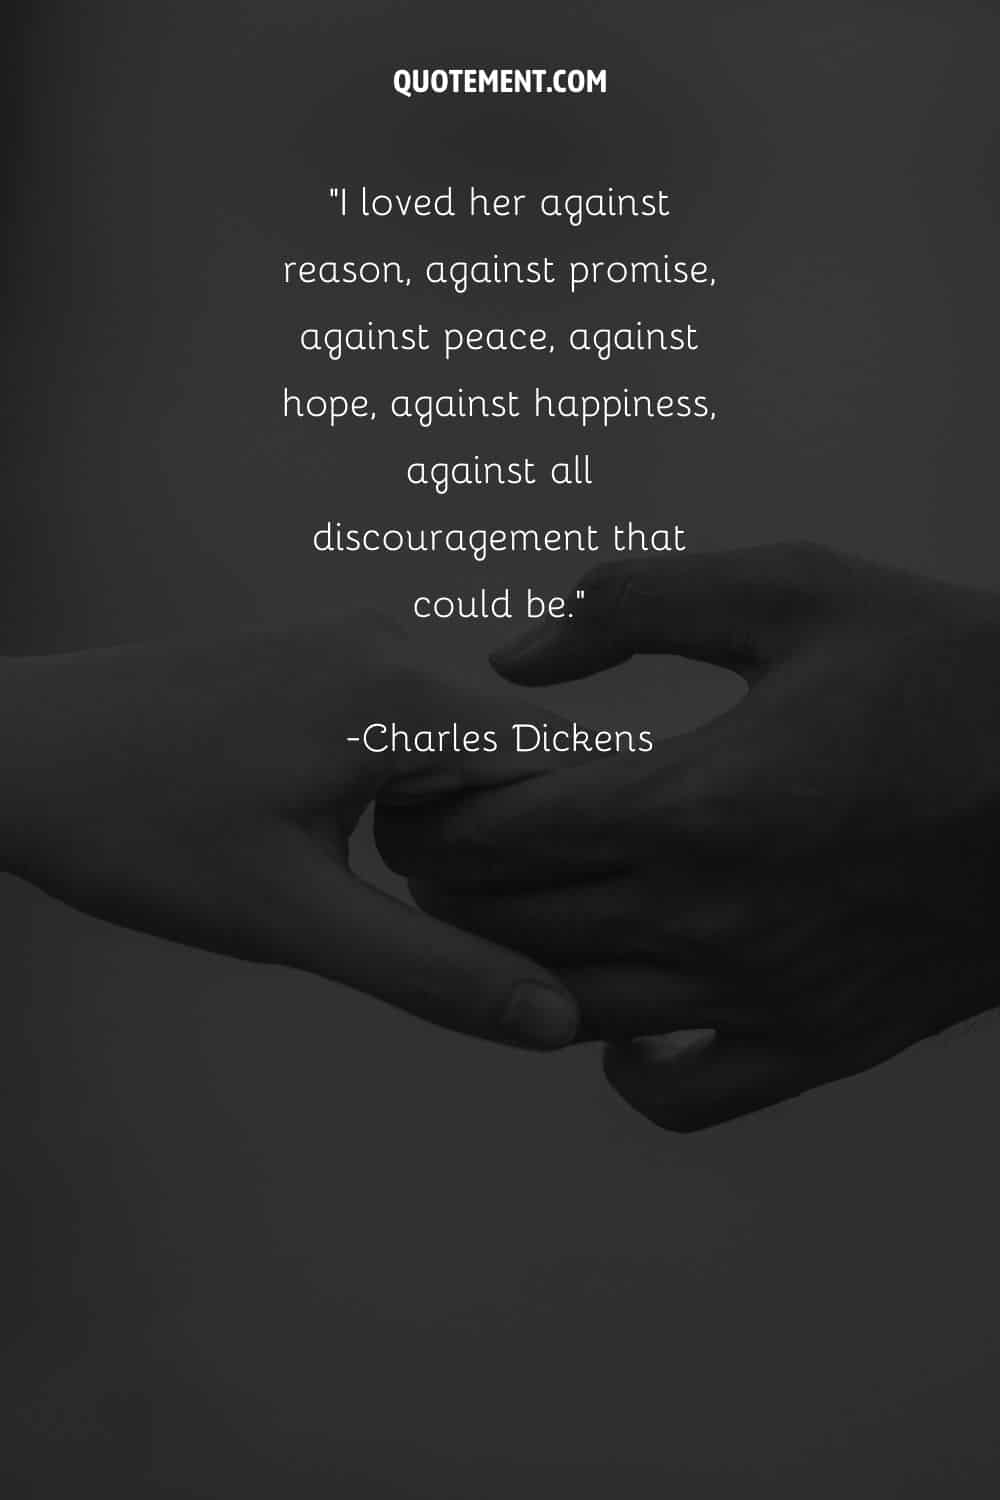 Monochrome image of interlocked hands representing a love quote by Charles Dickens
